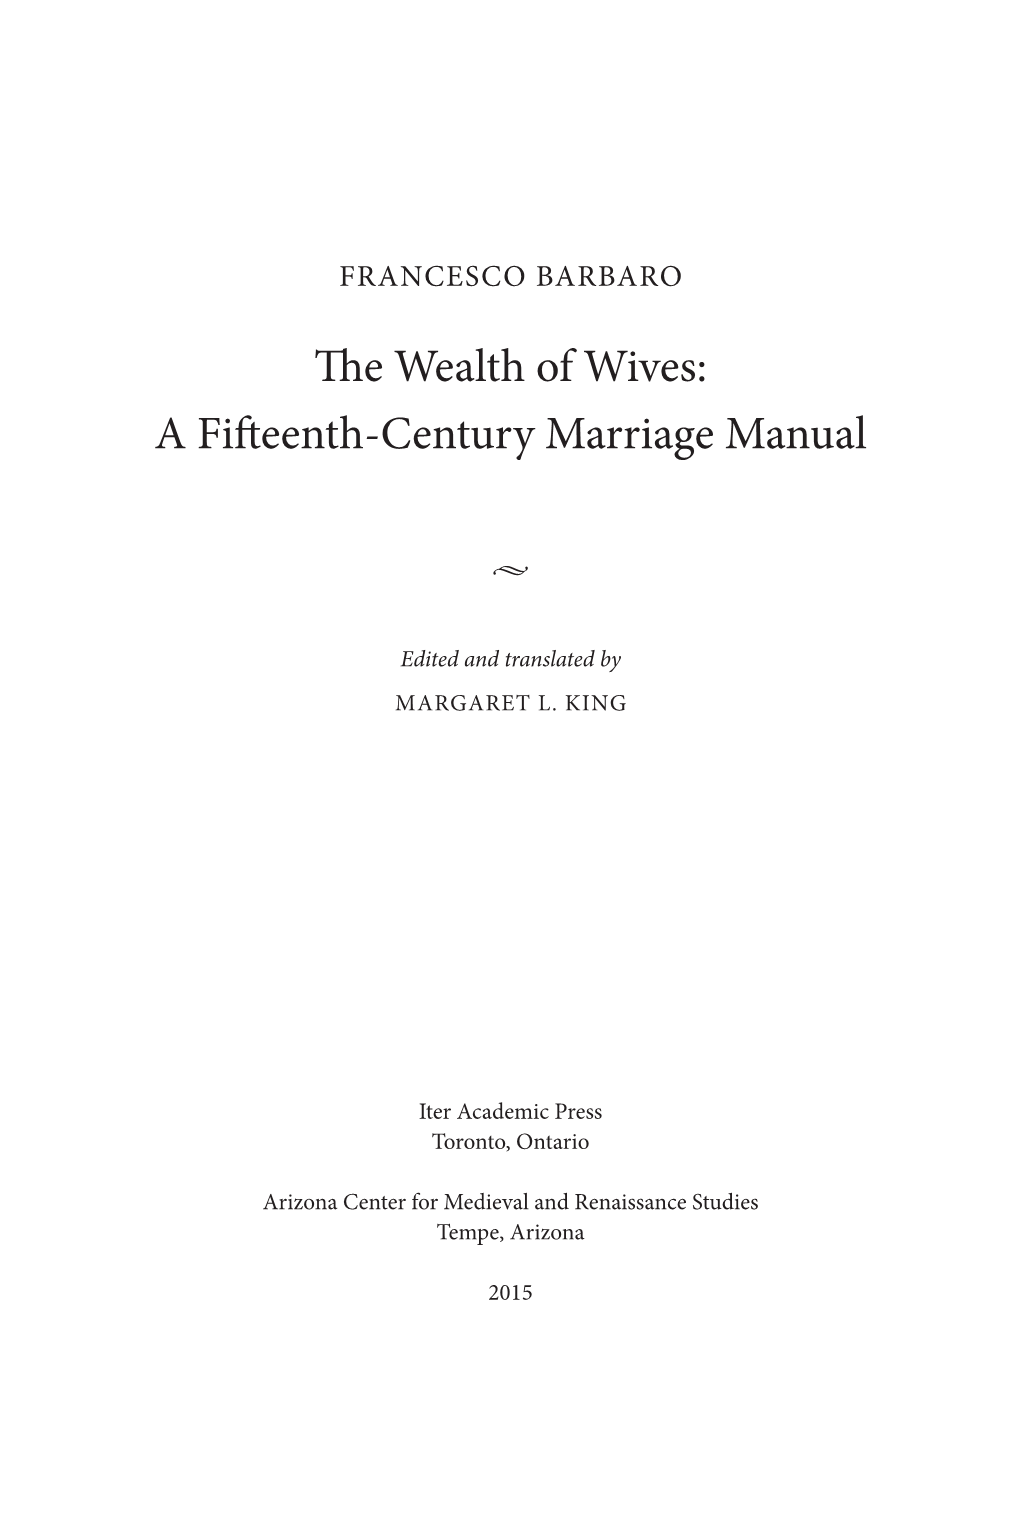 The Wealth of Wives: a Fifteenth-Century Marriage Manual